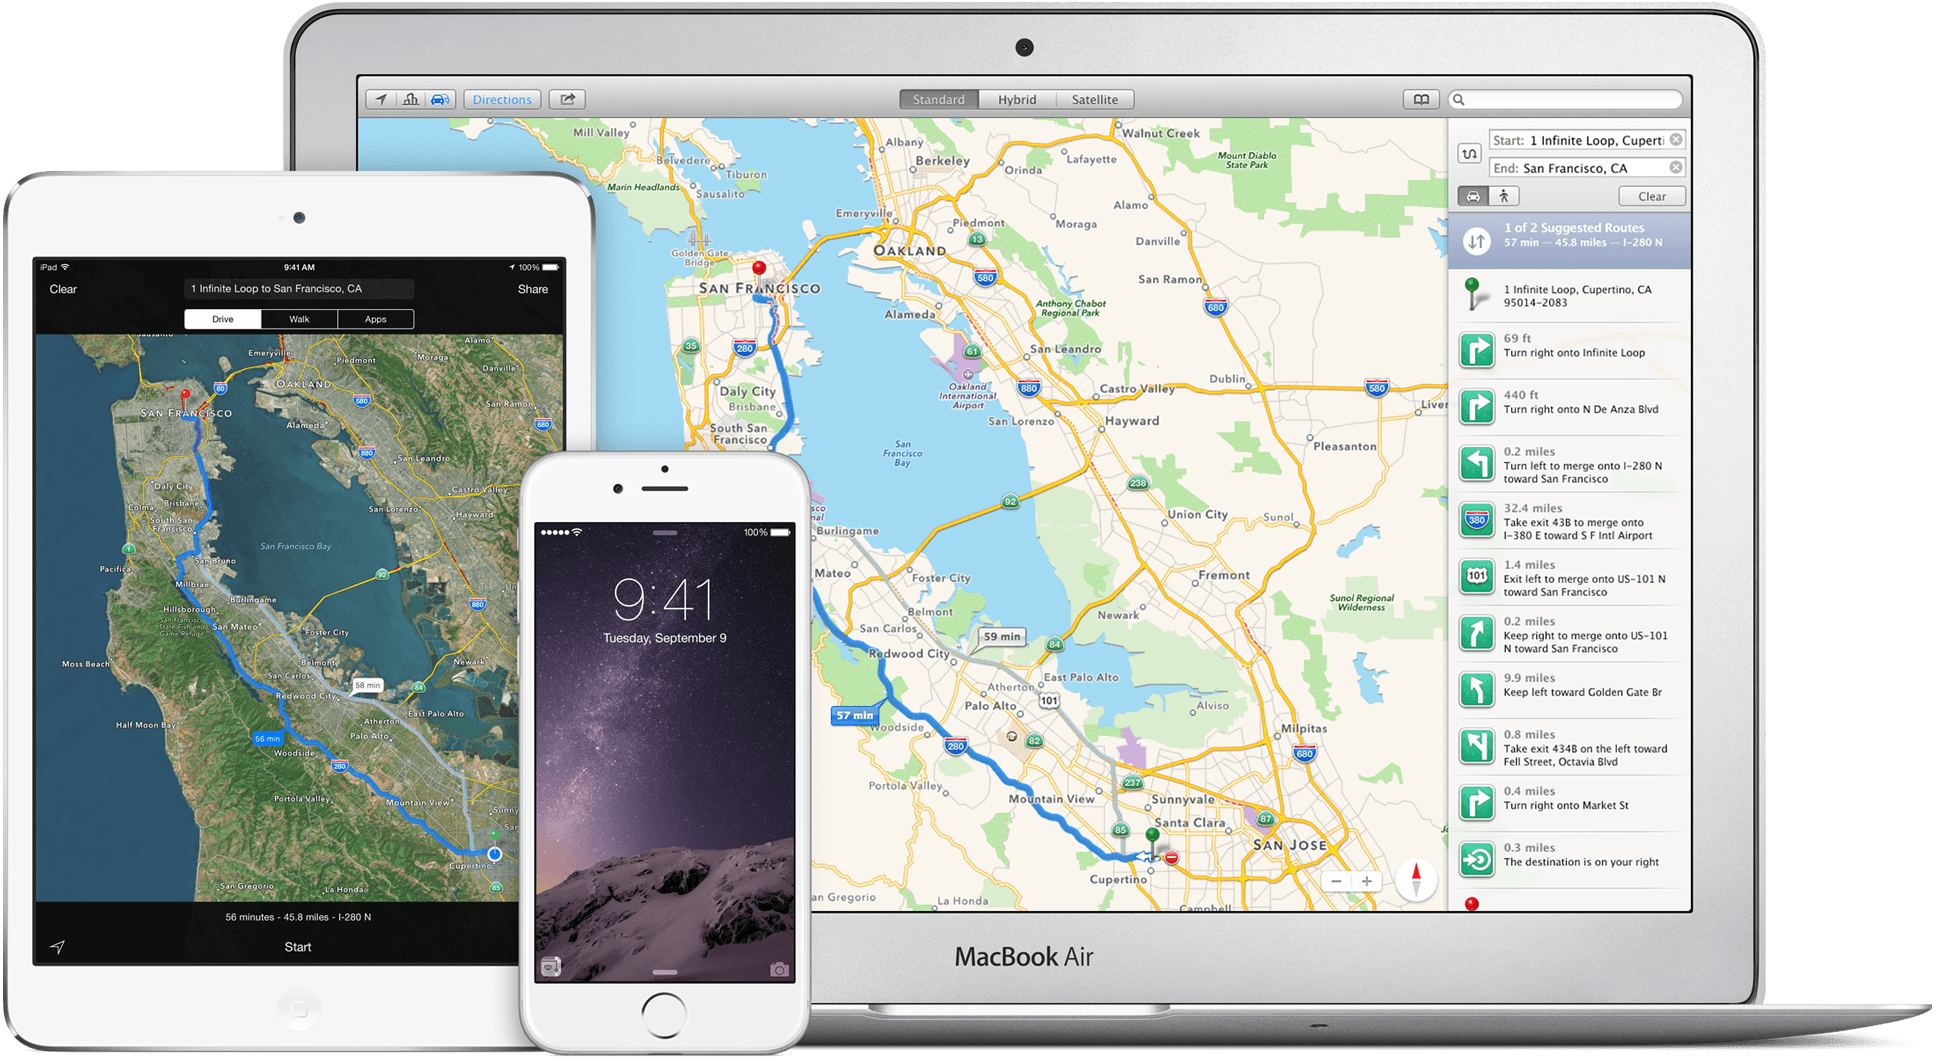 Find out when your Mac is looking at your location data.